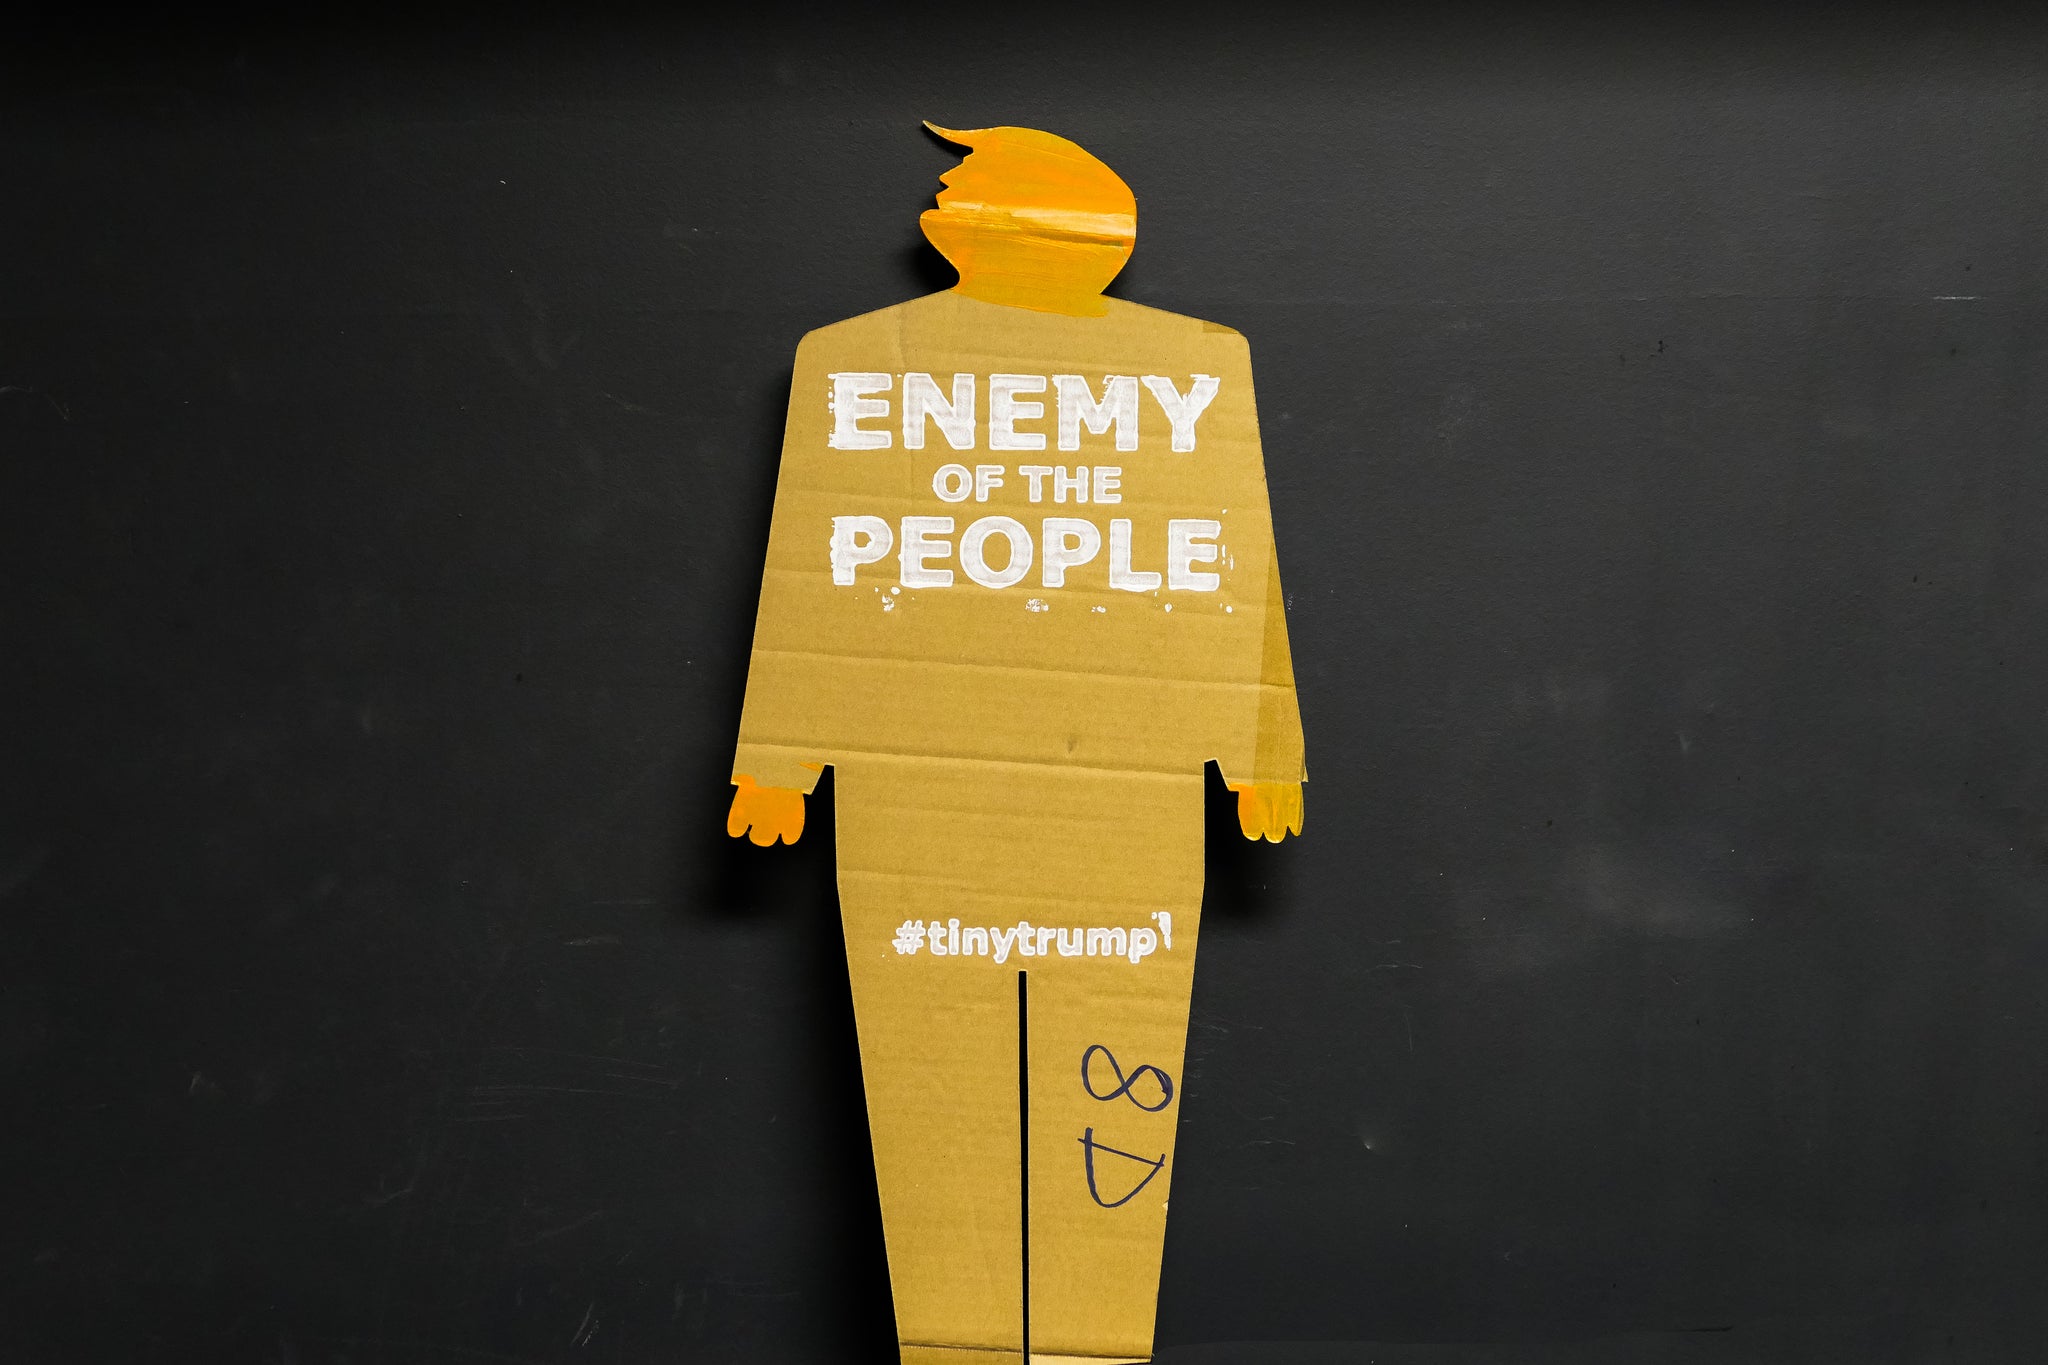 A two foot tall, cardboard tiny trump with the slogan "Enemy of the People"